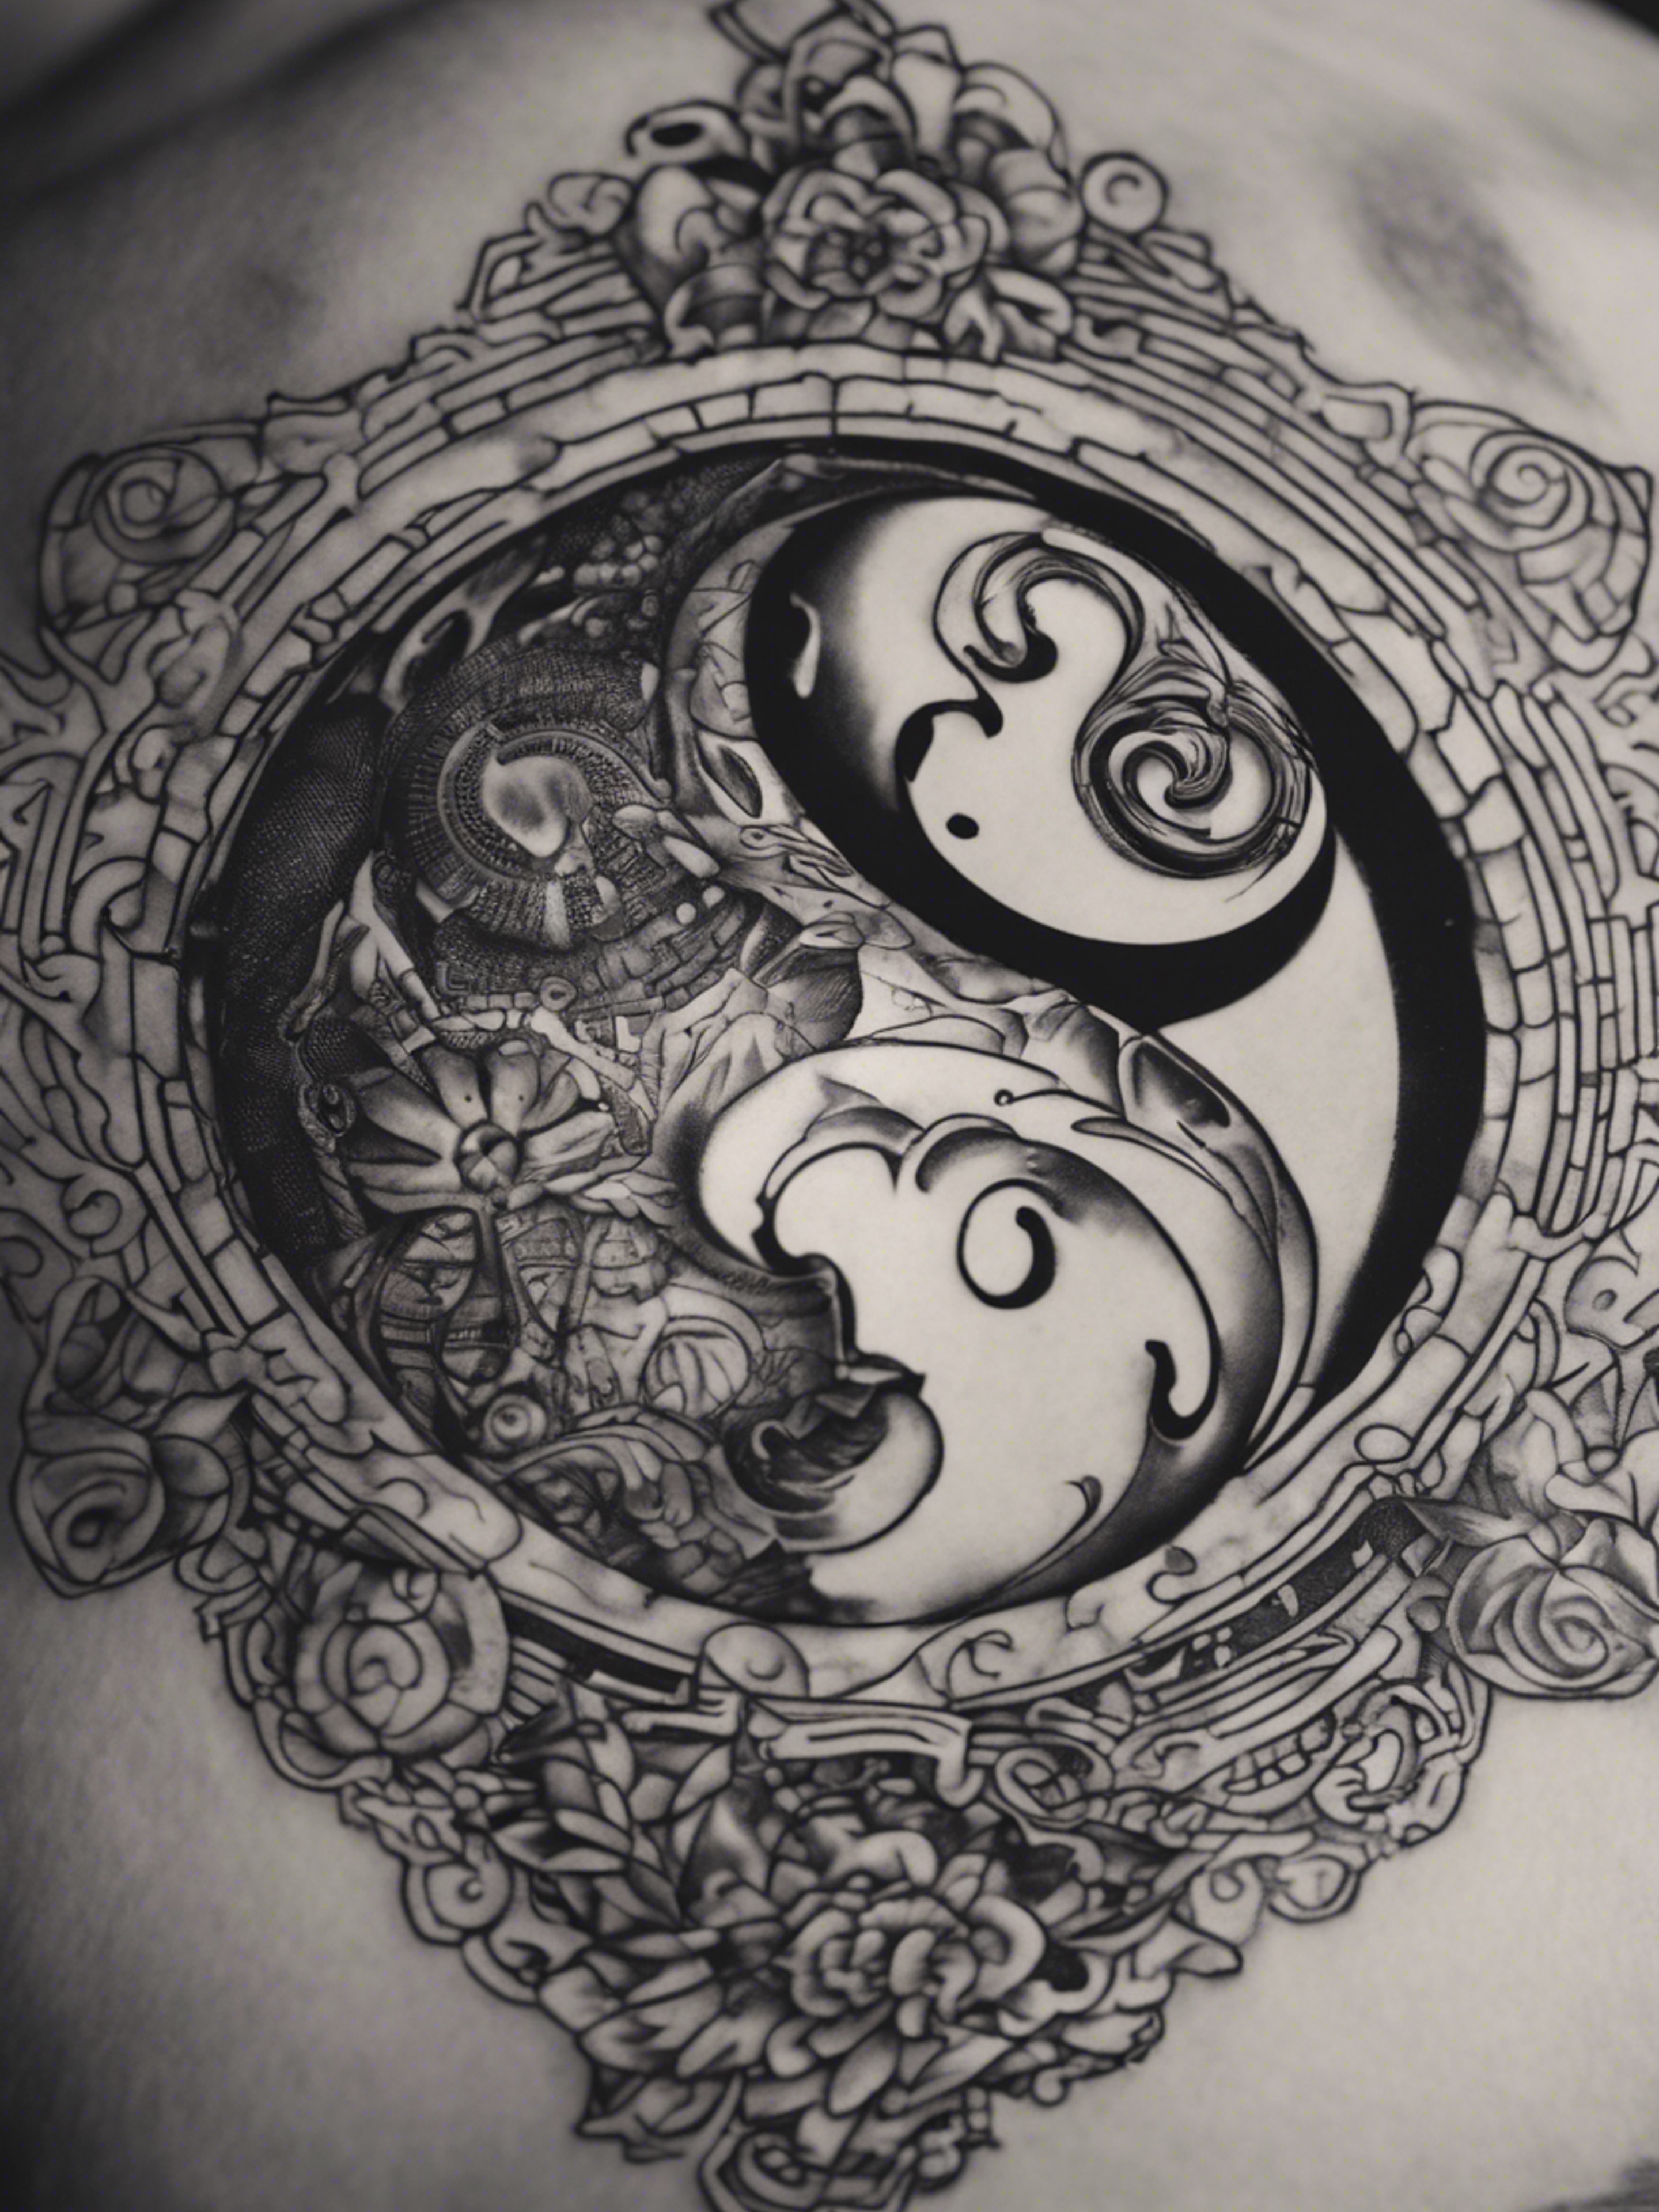 A black and gray tattoo demonstrating the sharp contrast of yin and yang. 牆紙[cf6688009cd14e619f30]